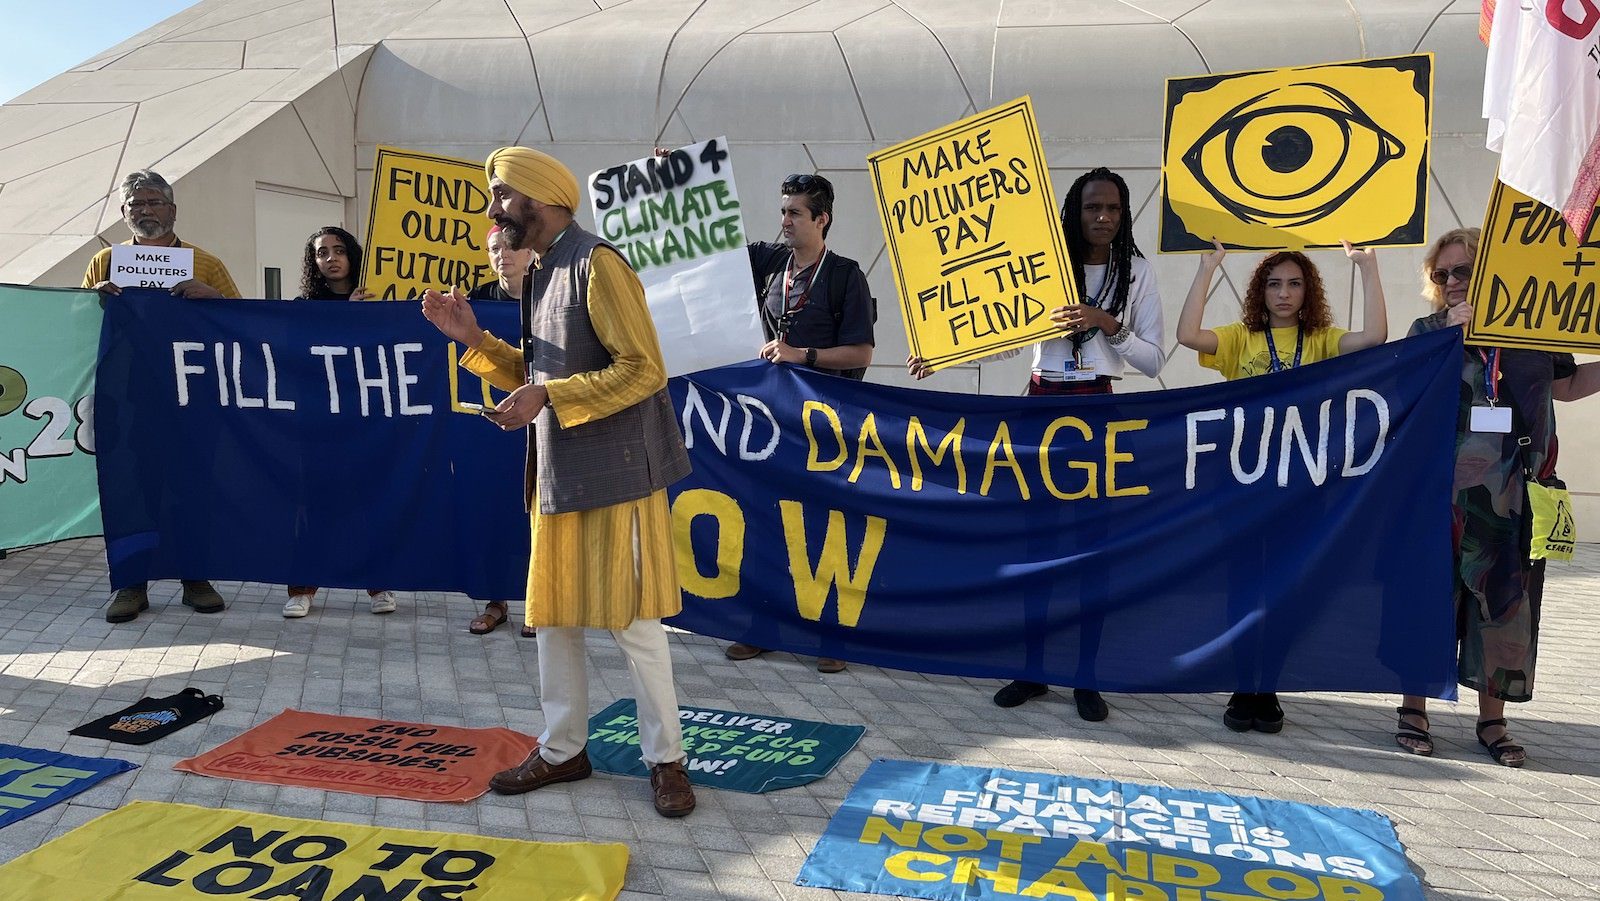 A man in a yellow turban and shirt stands near protesters and banners with messages related to climate reparations